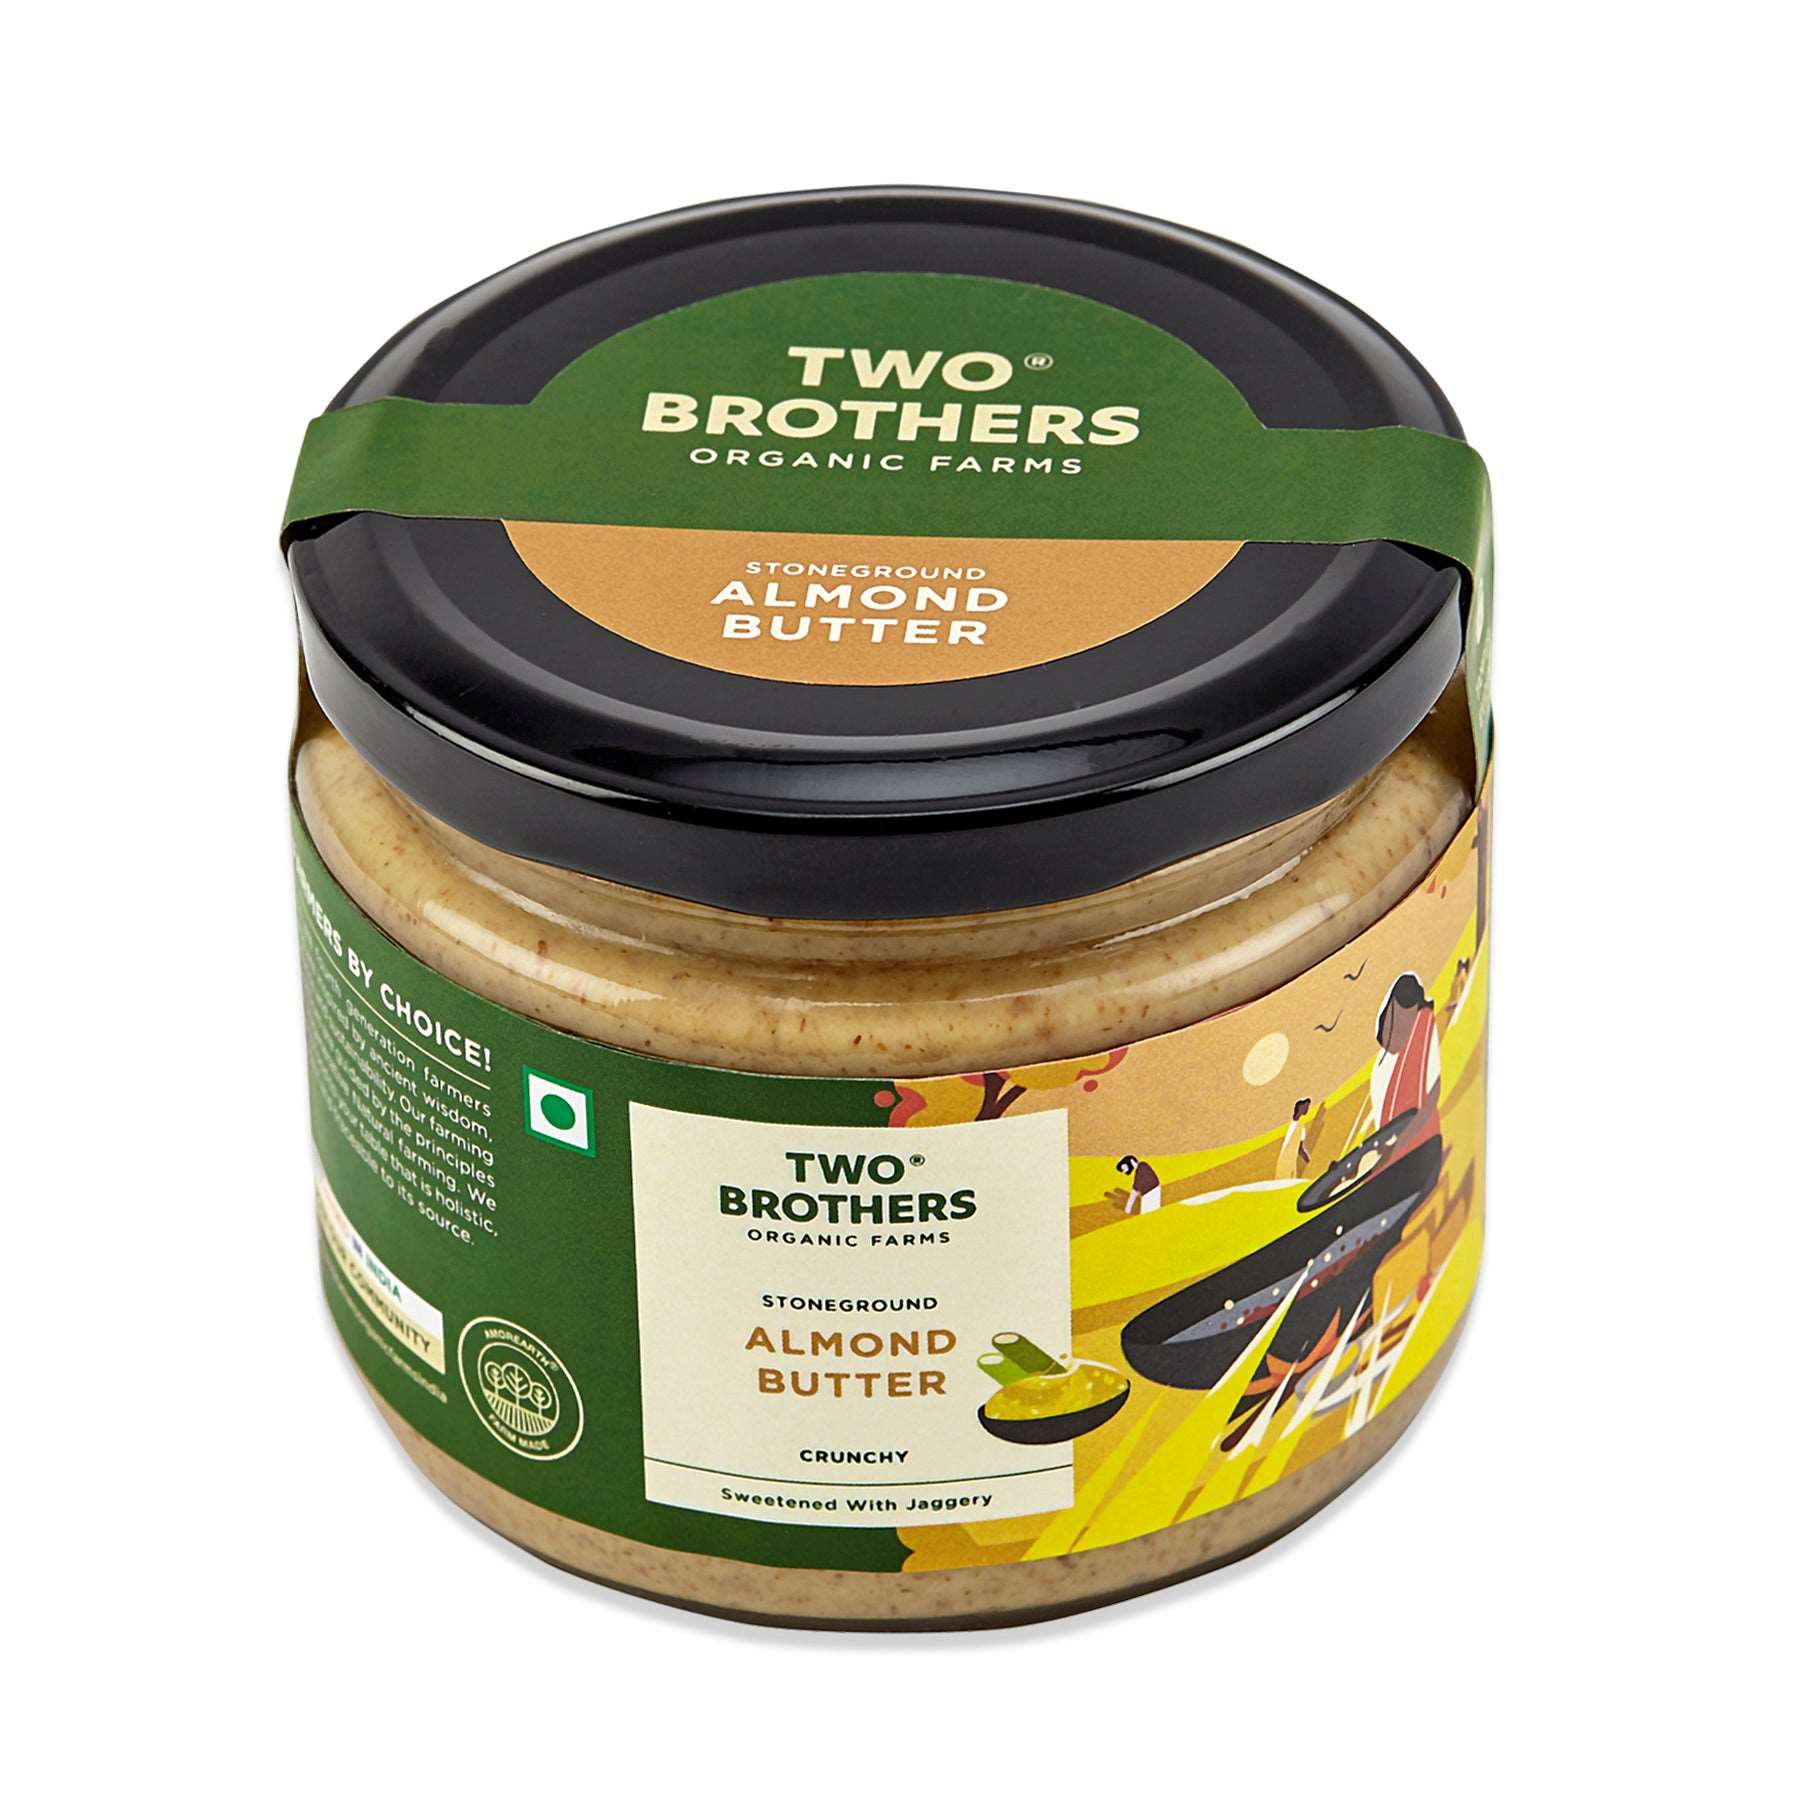 Crunchy and creamy almond butter by TBOF